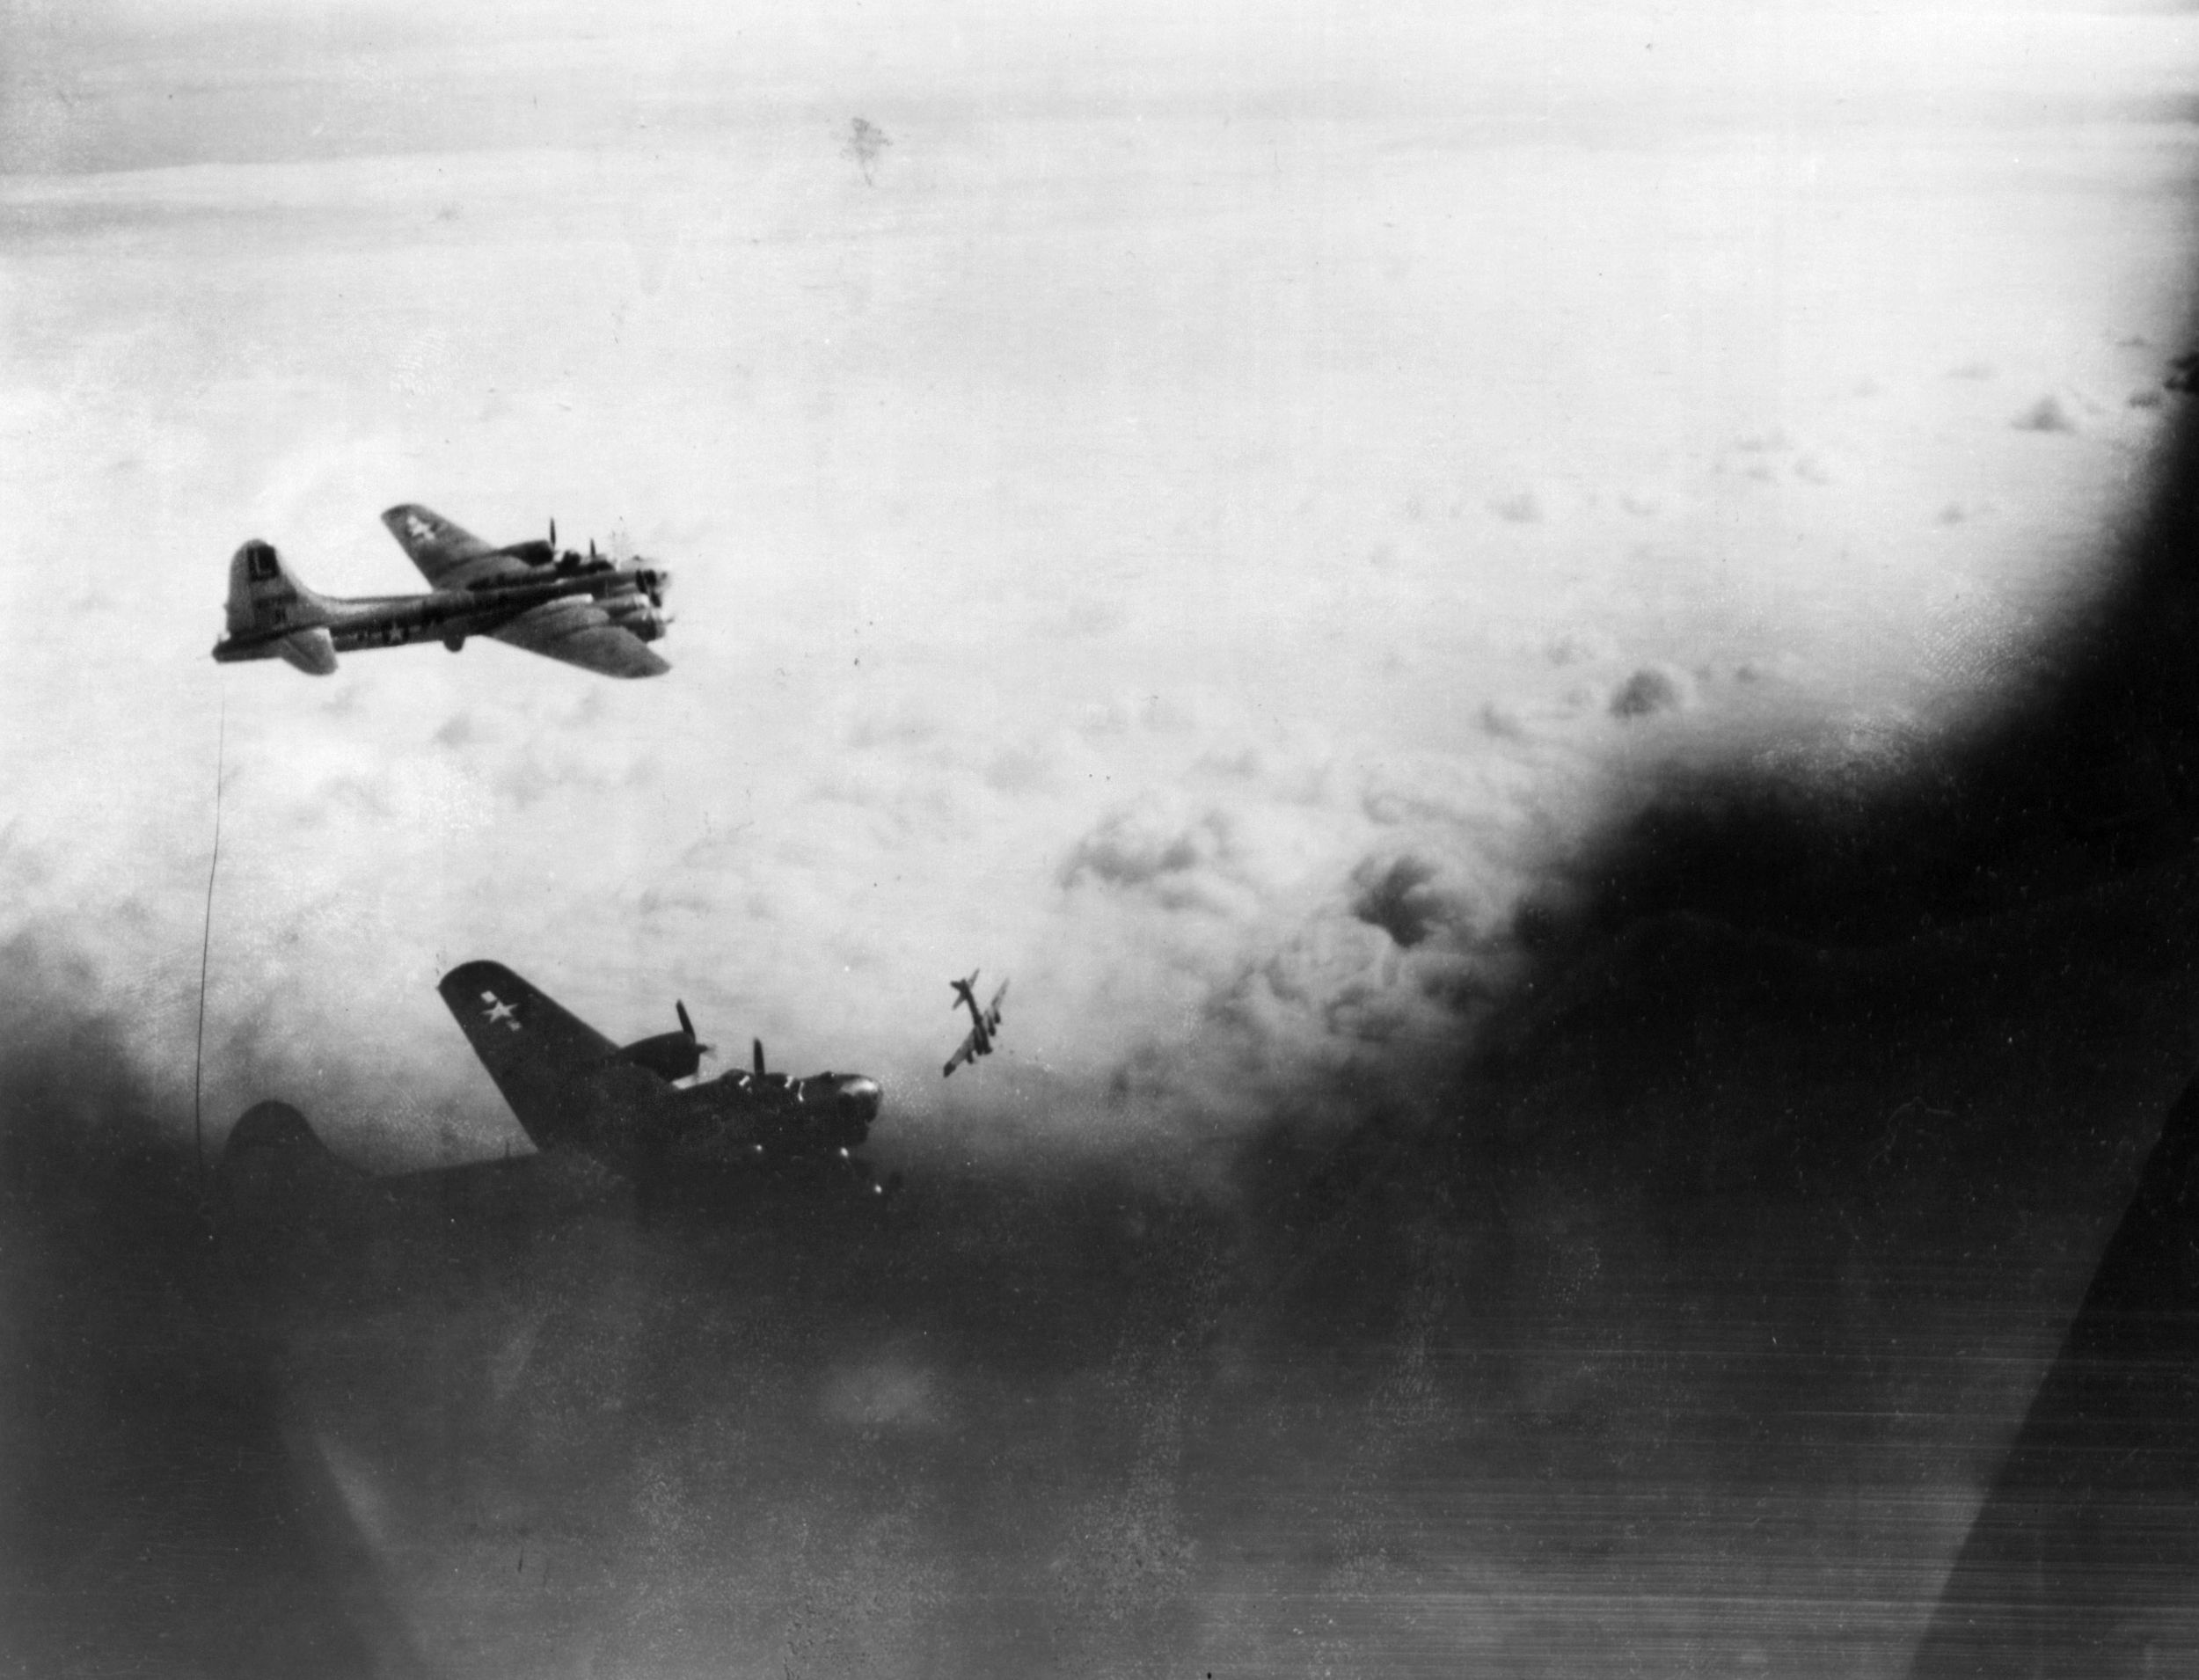 After the mid-air collision, Walthall’s B-17 began to plummet earthward in a backward spin similar to the attitude of the bomber in this photo at lower right. The stricken Flying Fortress quickly descended into a bank of clouds